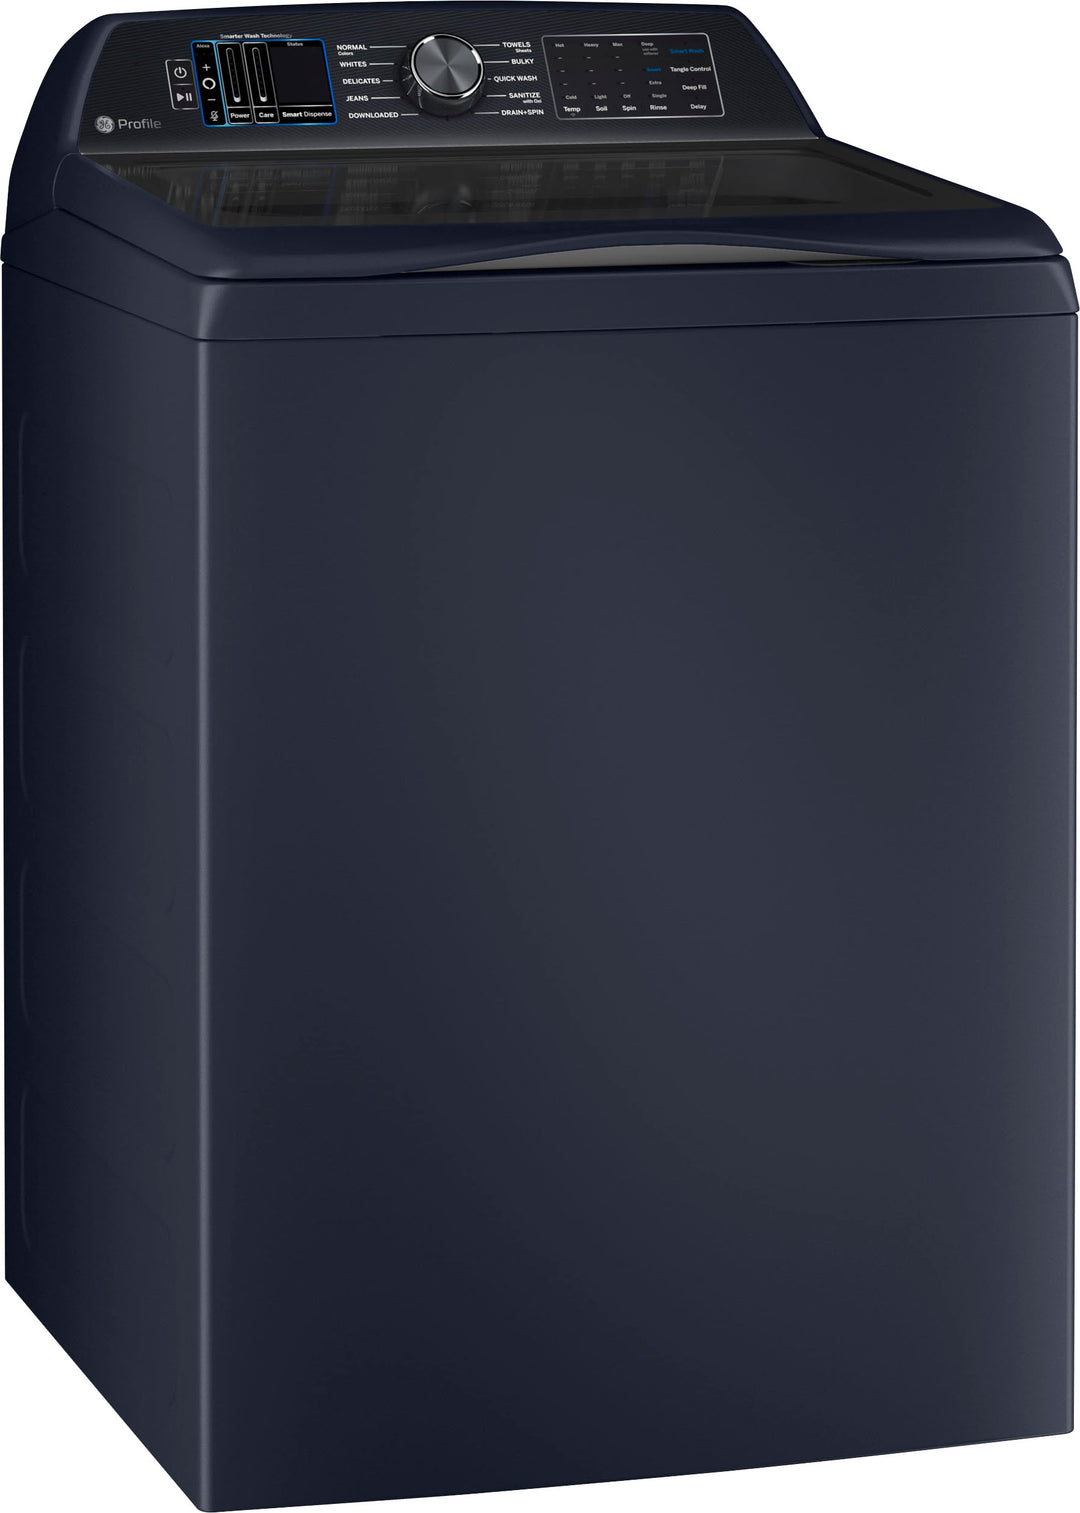 GE Profile - 5.4 Cu. Ft. High Efficiency Top Load Washer with Smarter Wash Technology, Easier Reach & Microban Technology - Sapphire blue_1